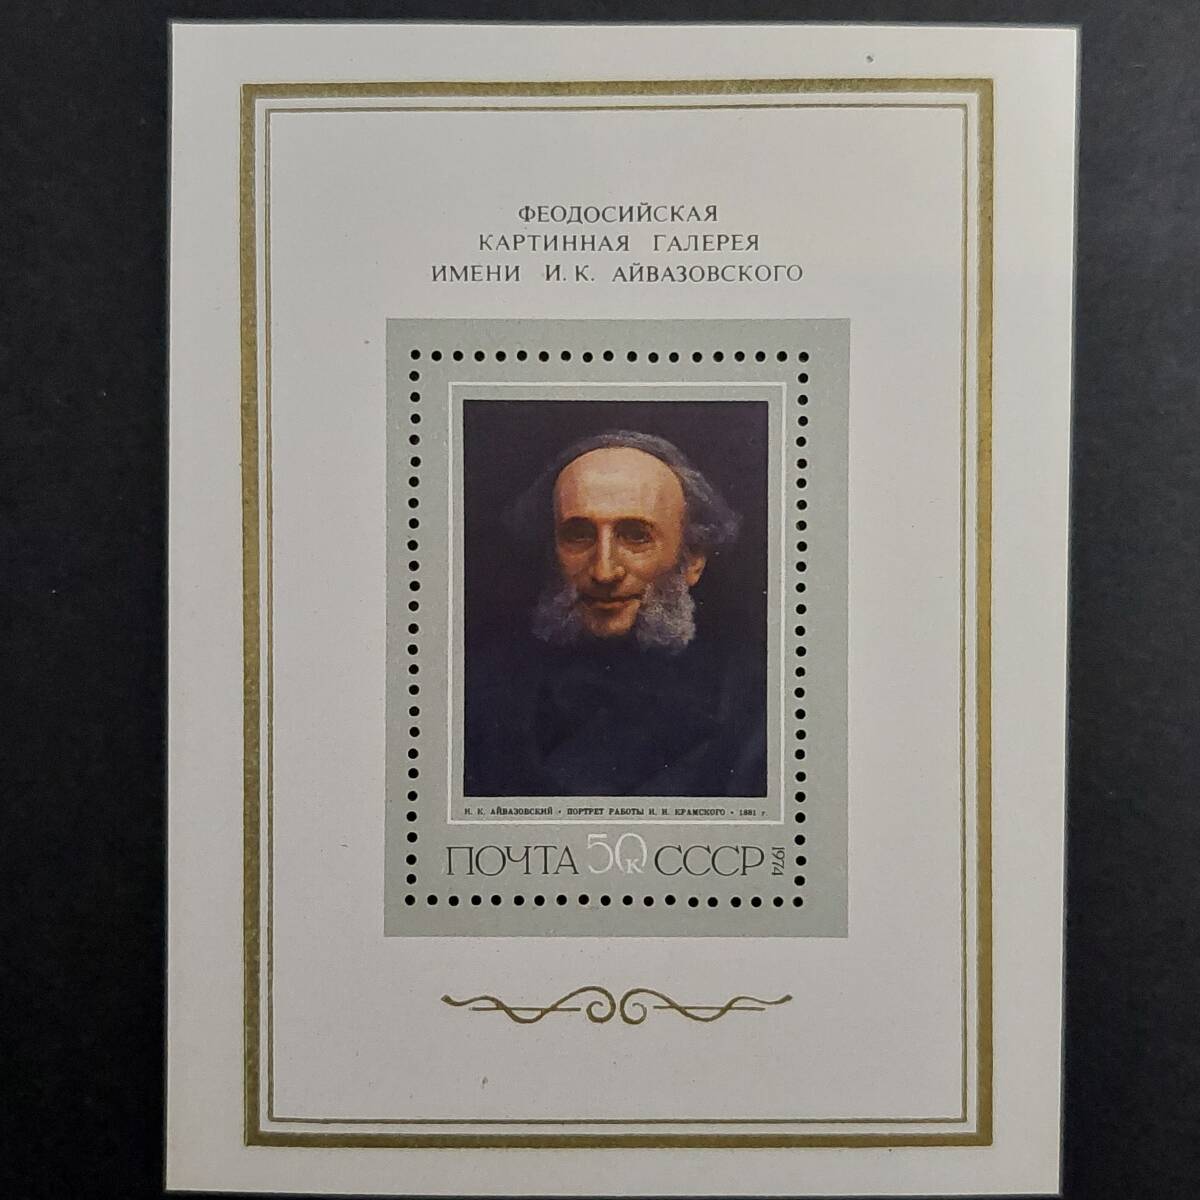 J588 Soviet Union Stamp Fine Art Stamp Portrait of Aivazovsky by Kramskoy, Small Sheet, Exhibited at the Russian Museum Masterpieces Exhibition 1974 Unused, antique, collection, stamp, Postcard, Europe